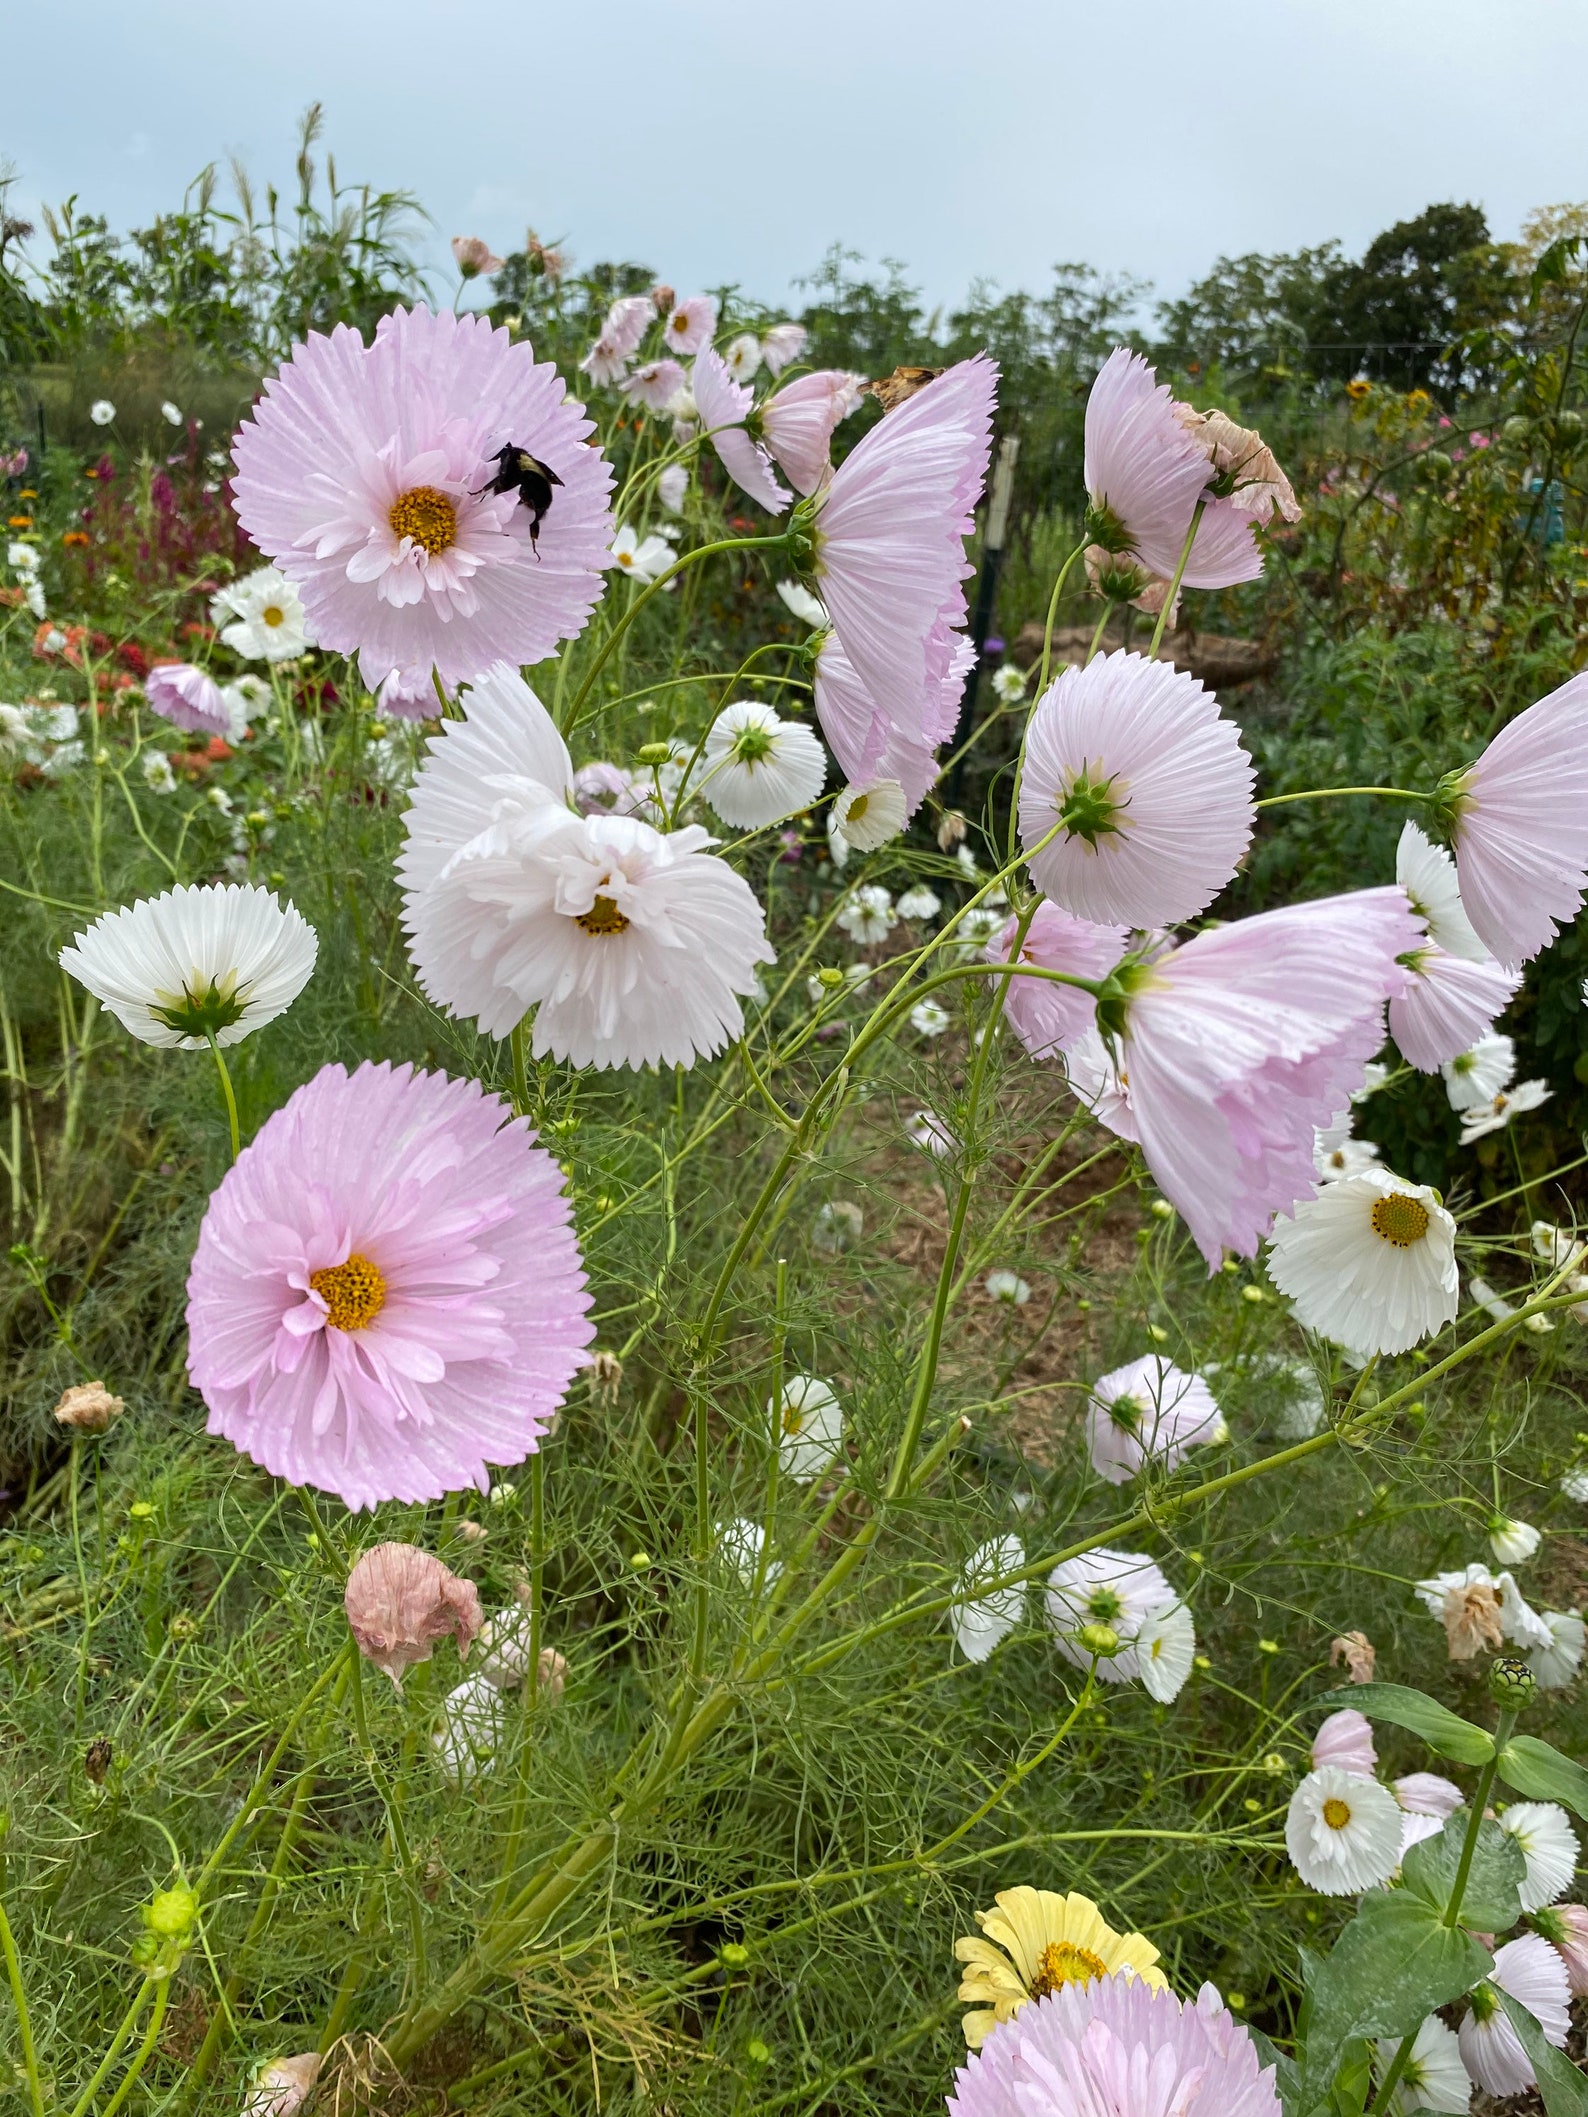 Blush Cupcake Cosmos Seed Pink Cosmos Seeds Great for Cut | Etsy